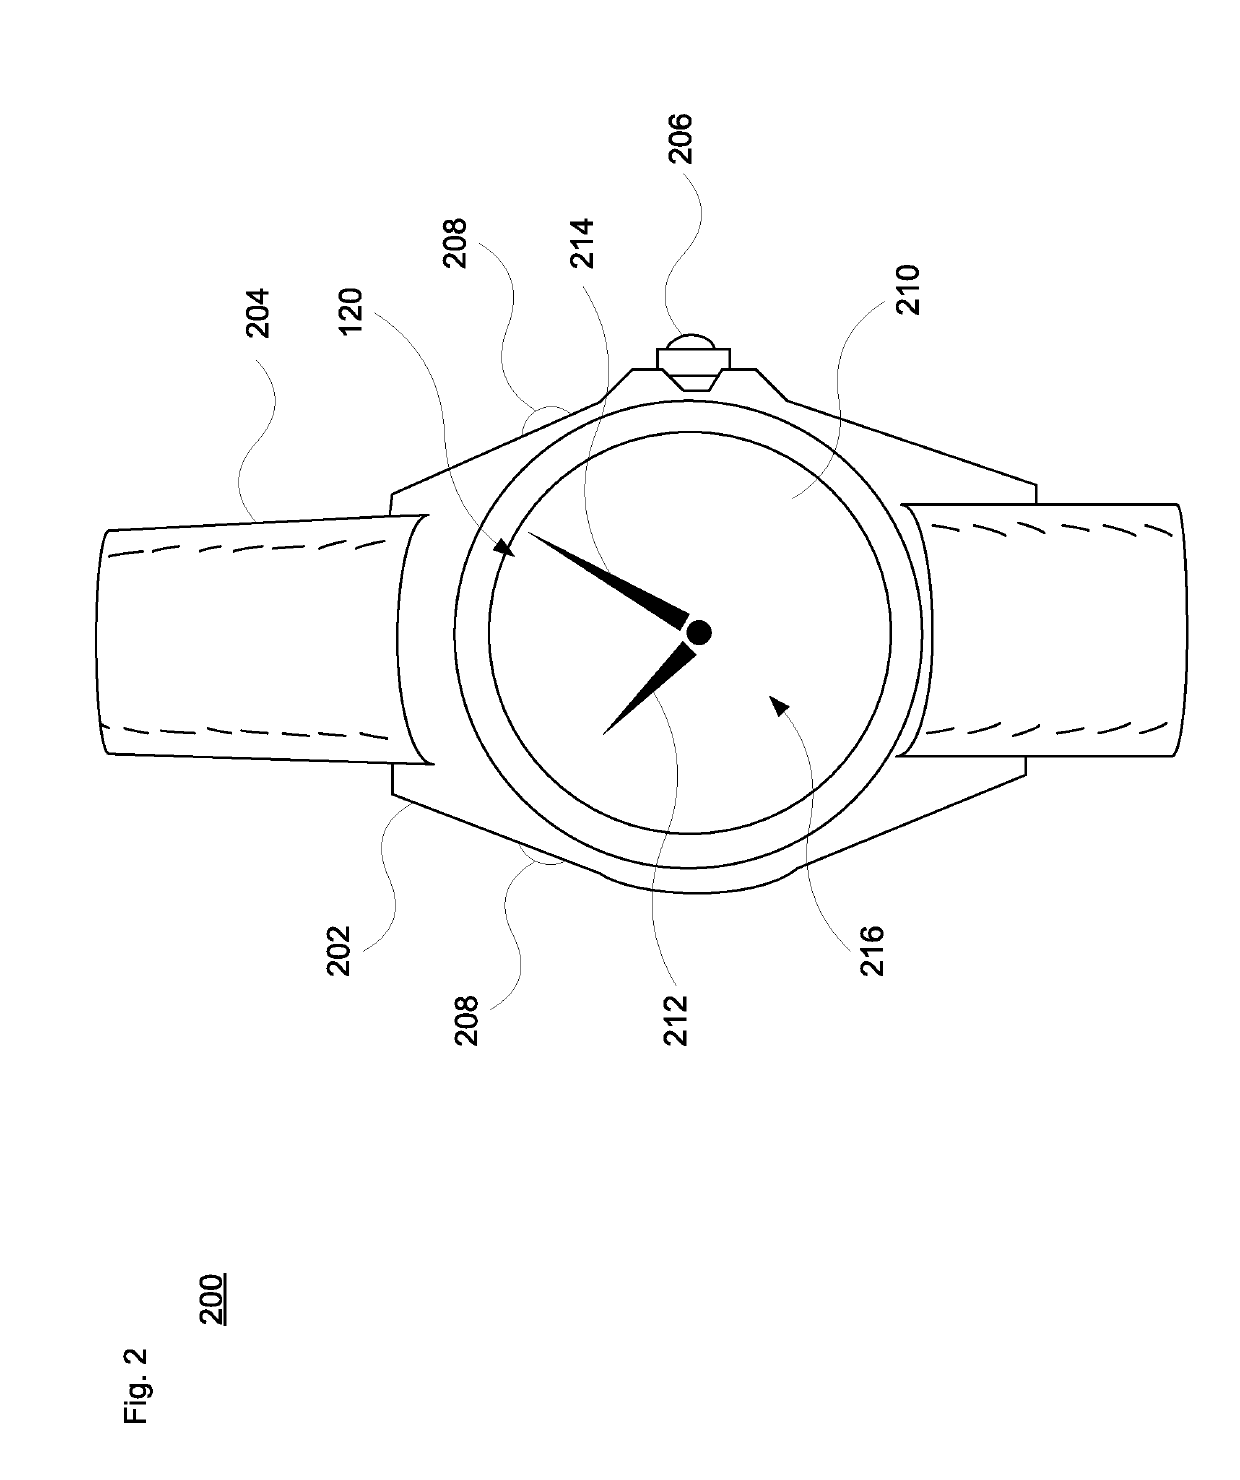 Bidirectional and expressive interaction in a hybrid smart watch